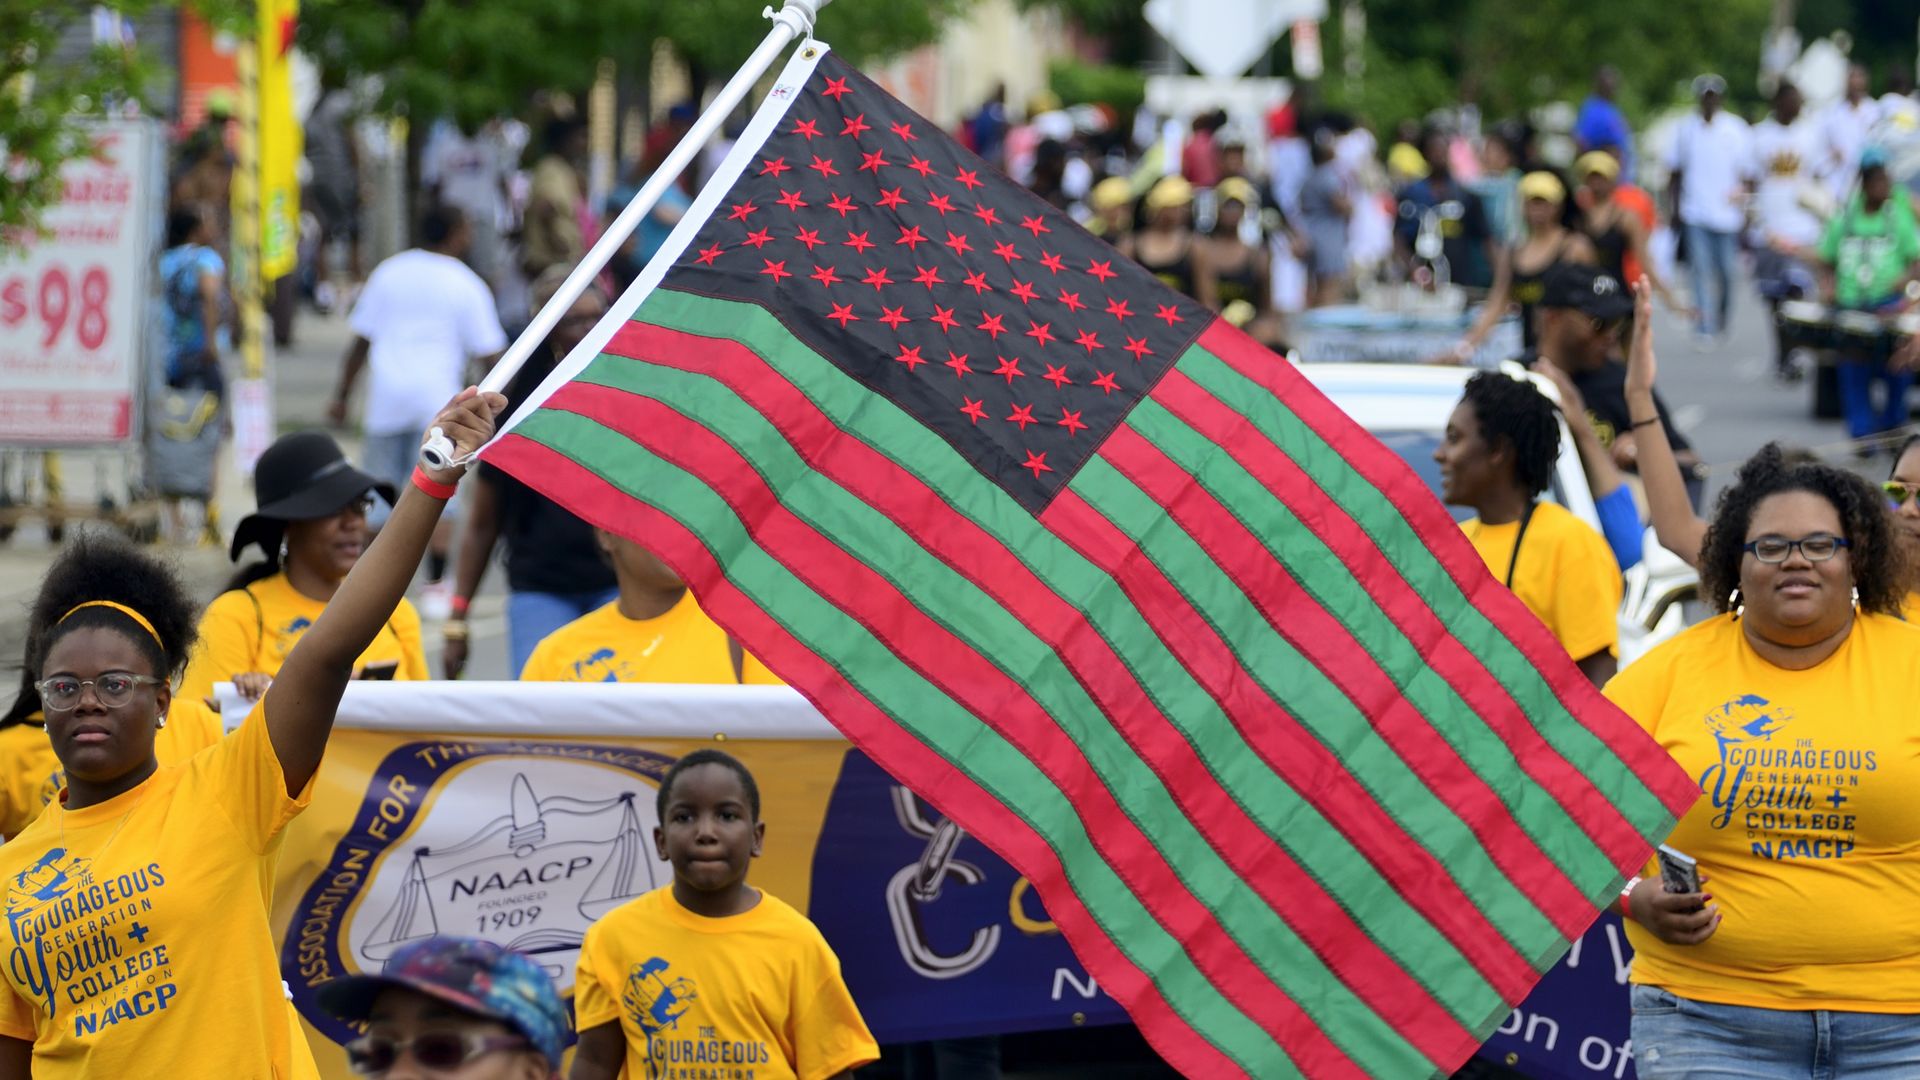 Elected officials, community leaders, youth and drum and marching bands take part in the second annual Juneteenth Parade, in Philadelphia while holding a red and green American flag